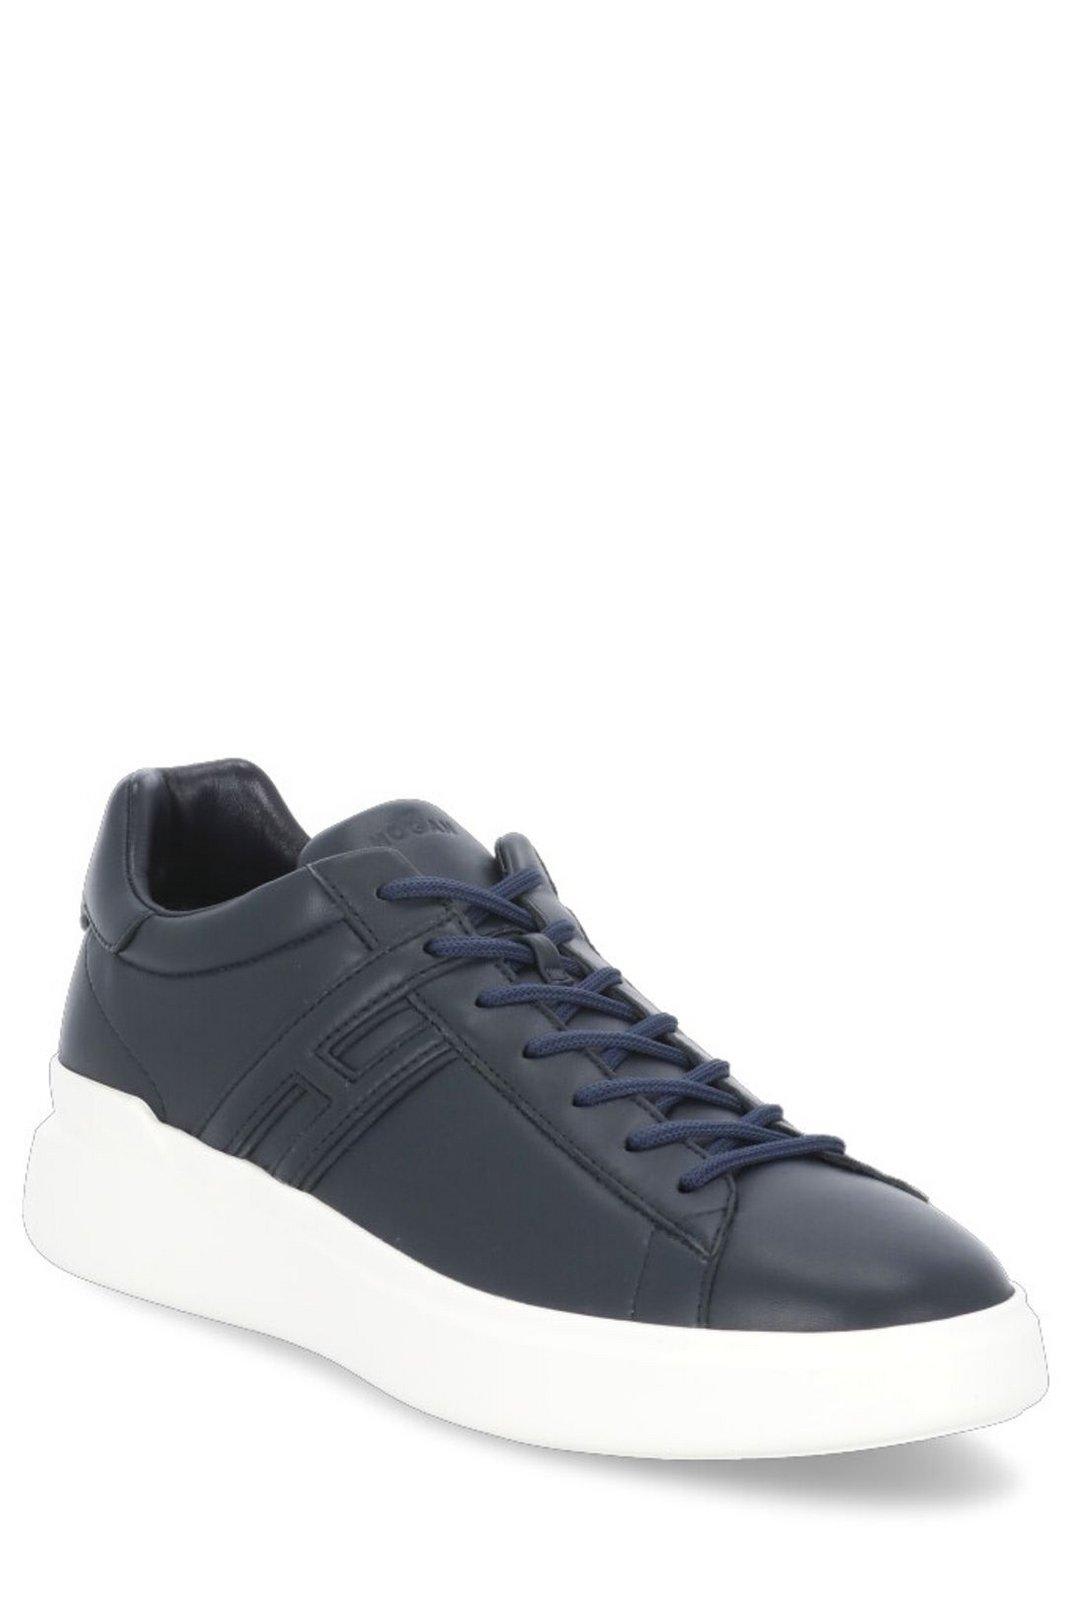 Shop Hogan H580 Lace-up Sneakers In Navy